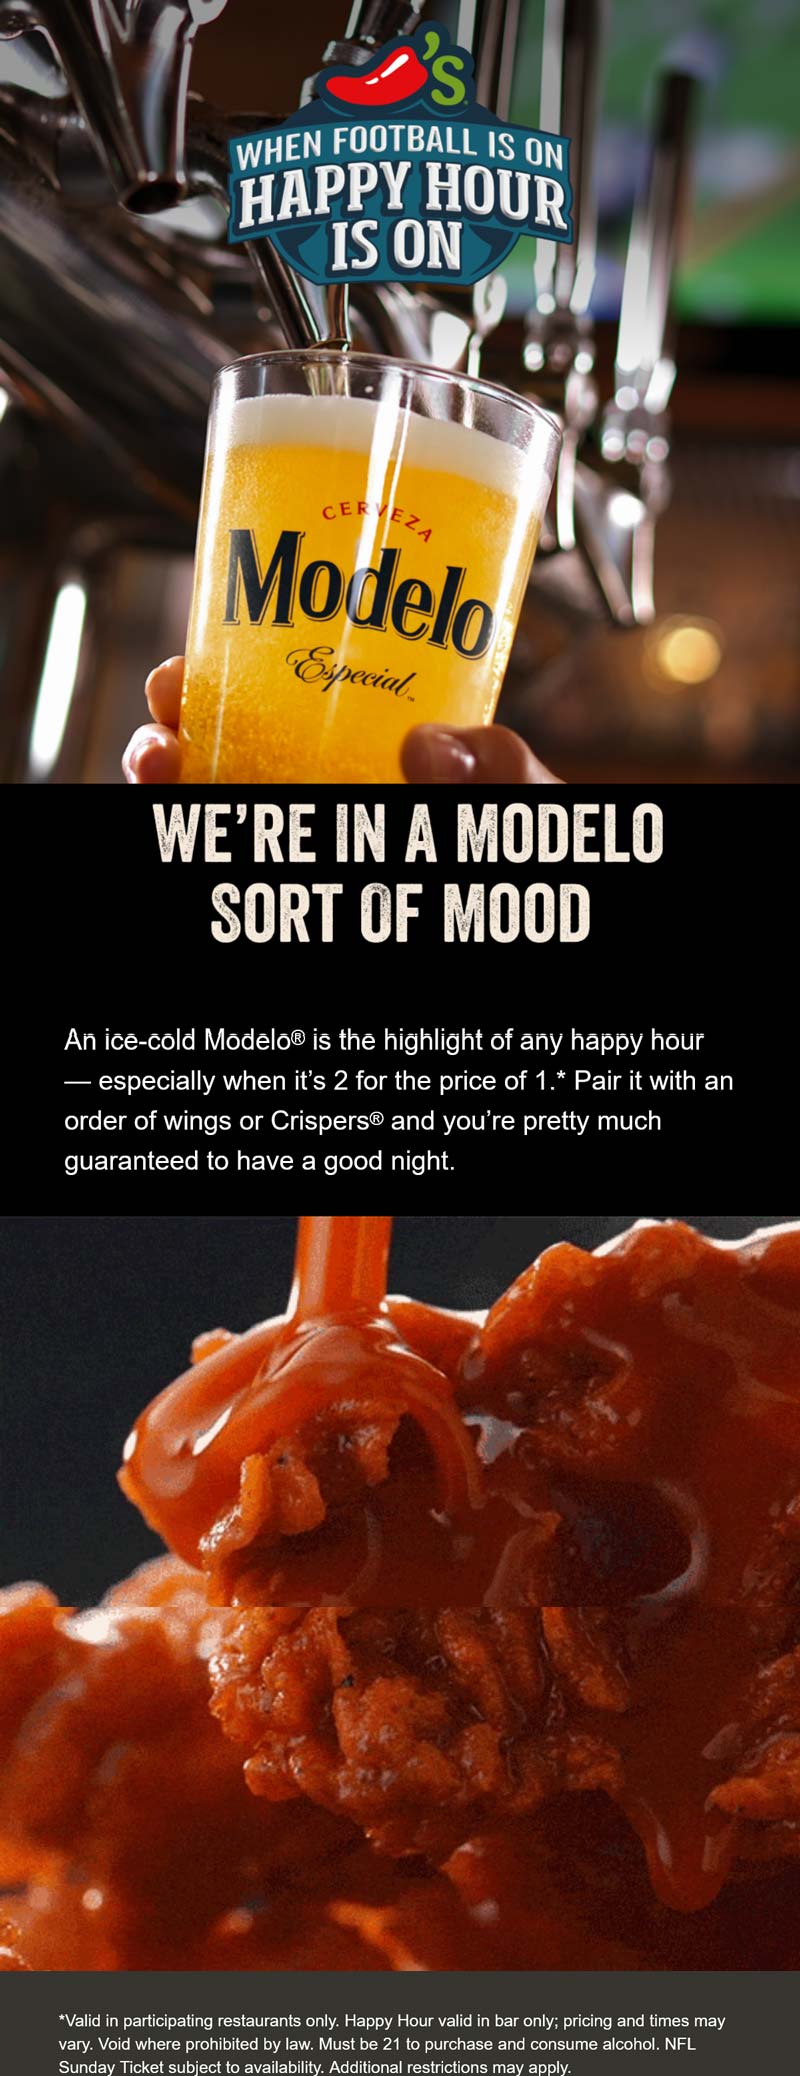 Second Modelo beer free game night at Chilis restaurants #chilis